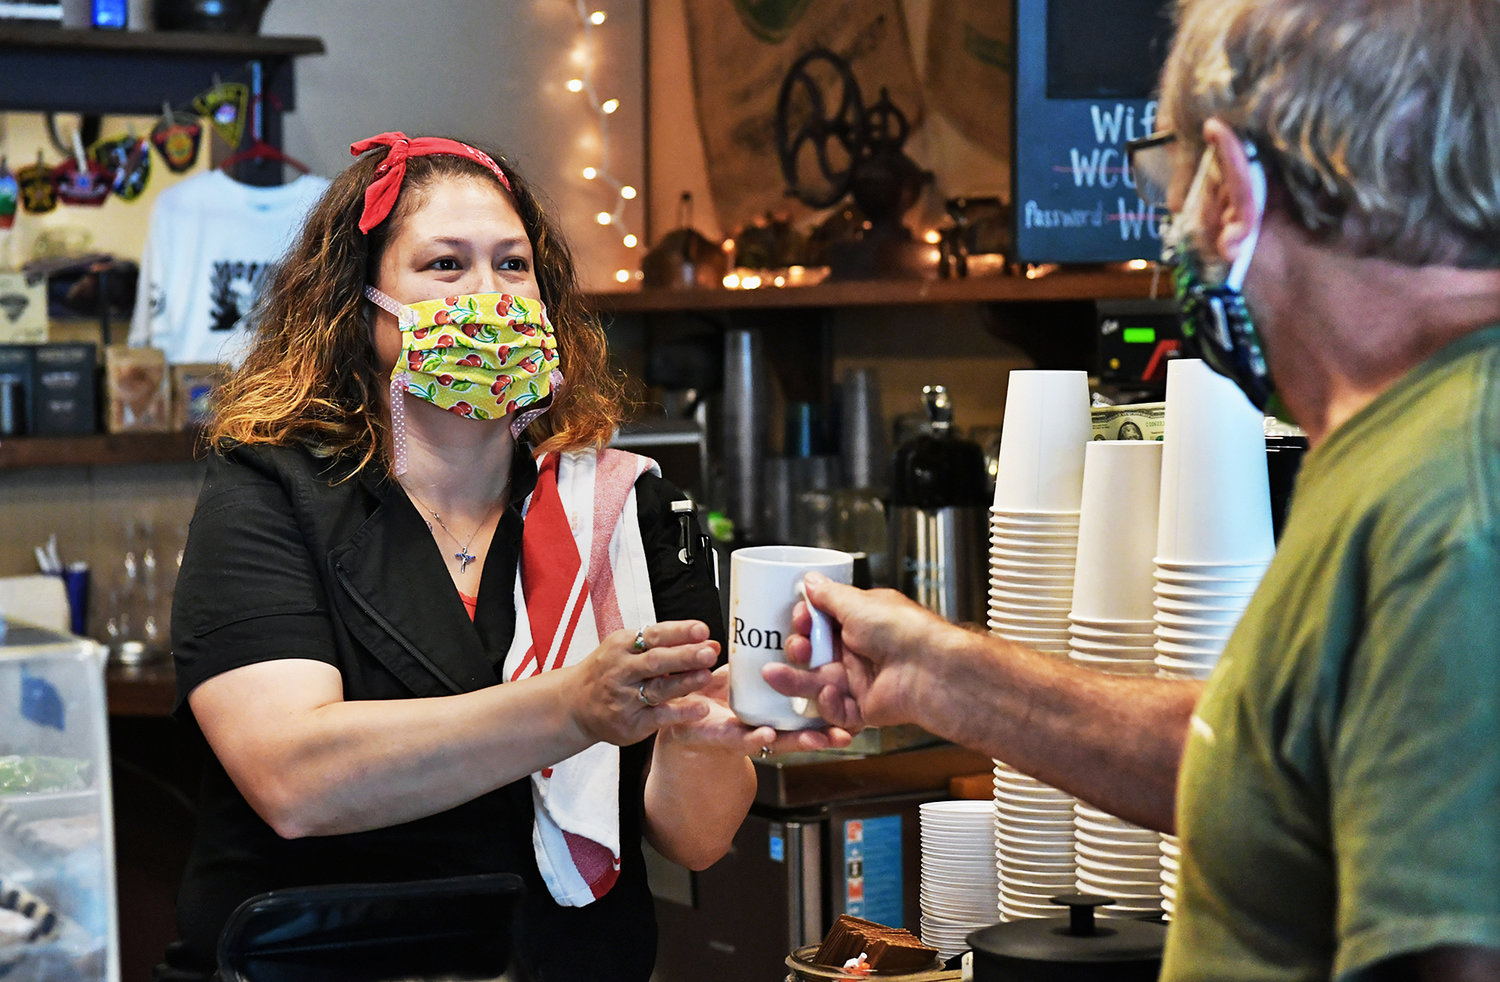 Maria Williams, owner of Tenino Coffee Bistro, has fielded seven calls recently from people as far away as New York seeking to purchase wooden scrip for up to $300 per $25 card. She has had no customers purchase any merchandise using the scrip, she said. Here she serves coffee to Ron Pemfield, 70, one of her regular customers.